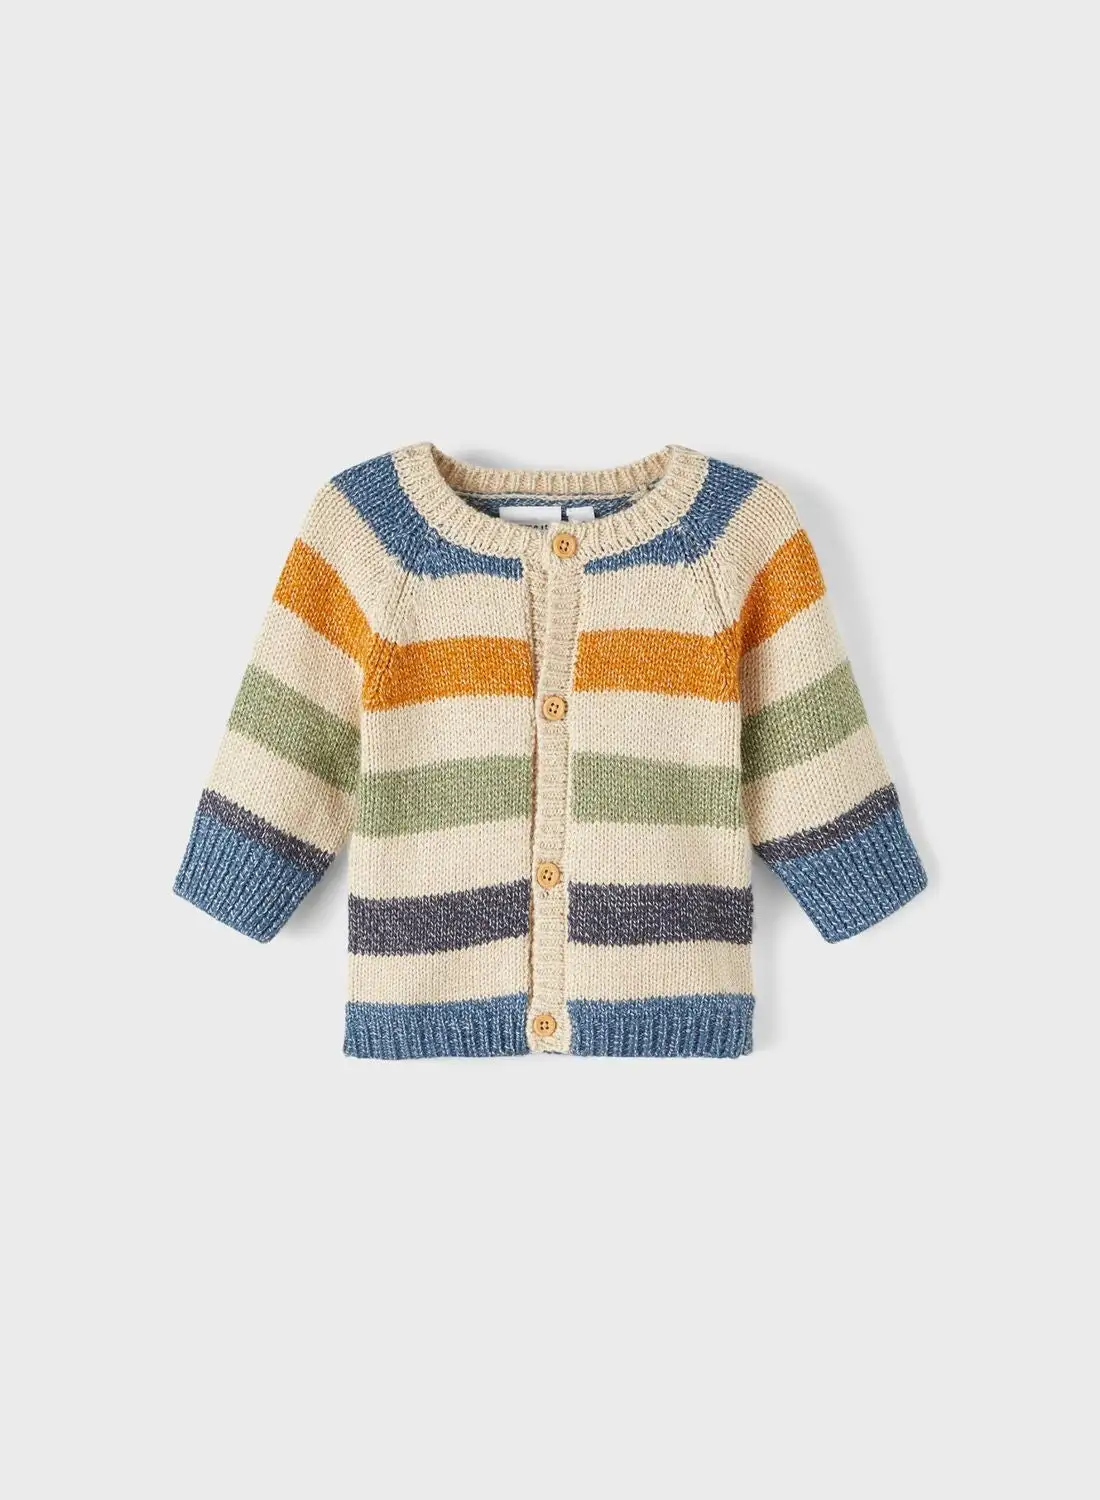 NAME IT Kids Striped Knitted Cardigan